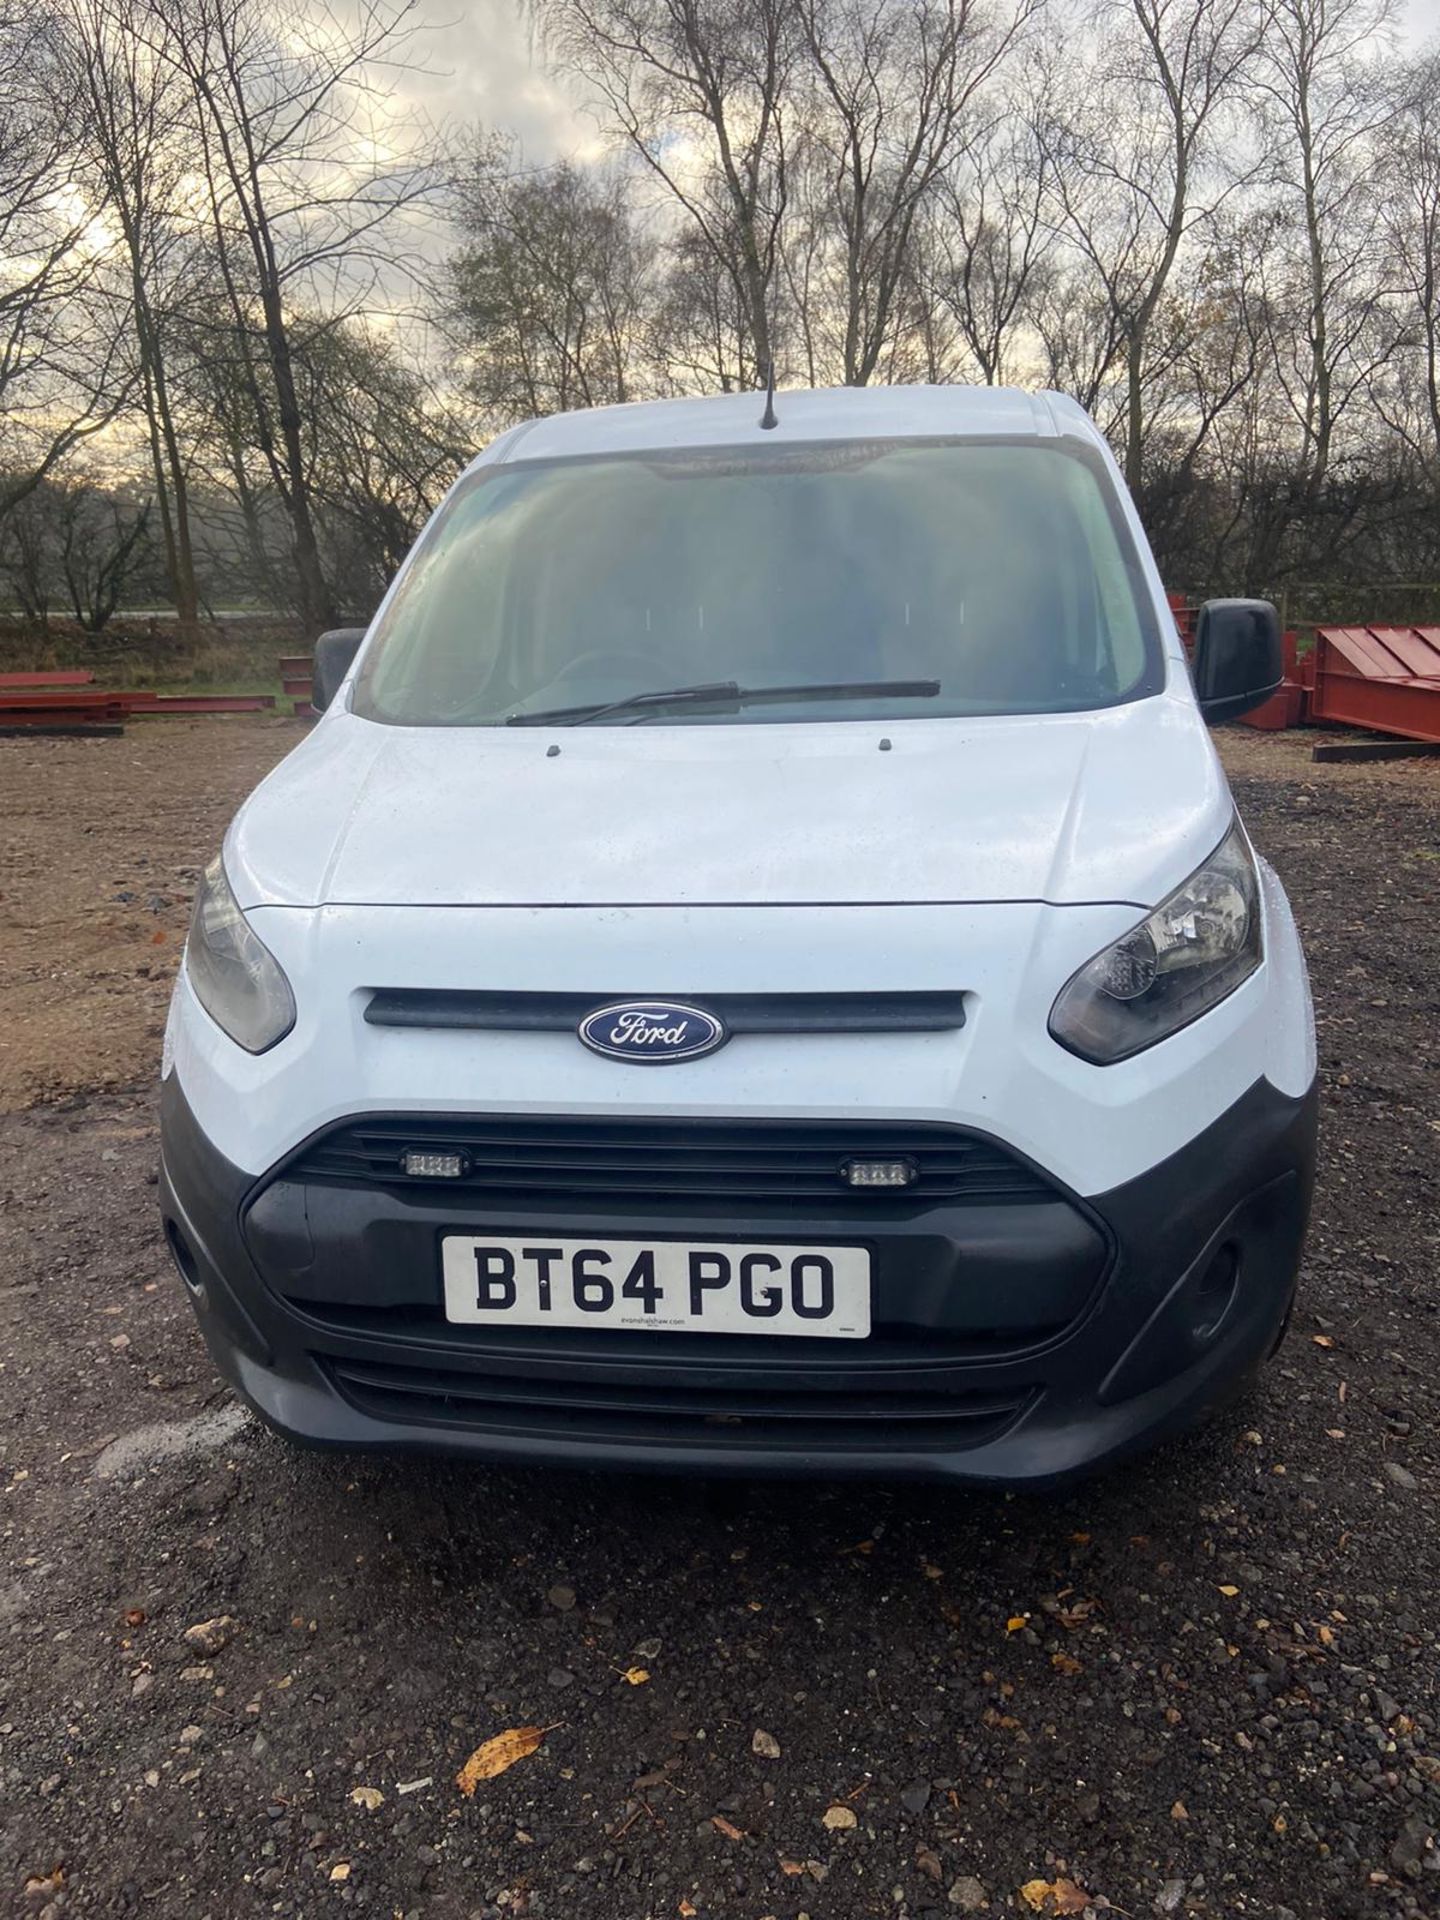 2015/64 REG FORD TRANSIT CONNECT 200 ECONETIC 1.6 DIESEL WHITE PANEL VAN, SHOWING 0 FORMER KEEPERS - Image 3 of 10